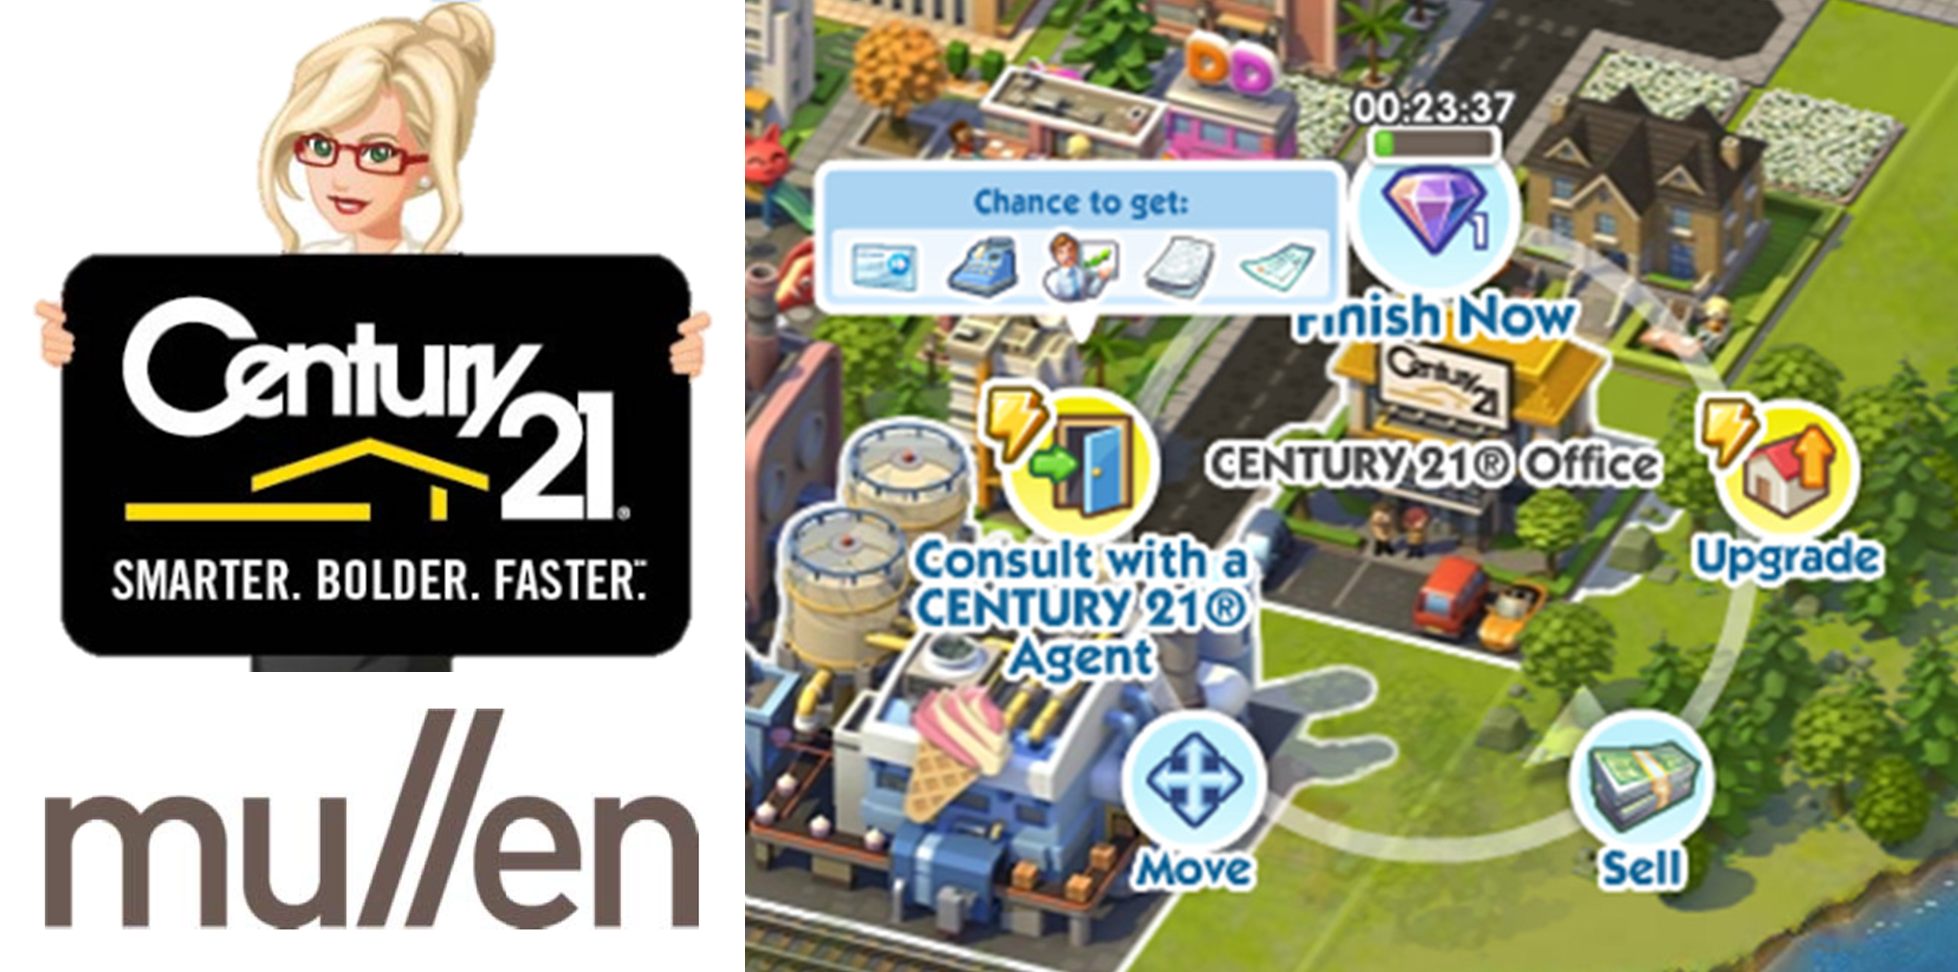 Century 21 Real Estate Moves into SimCity Social - Logo - https://s39939.pcdn.co/wp-content/uploads/2018/11/Centry21-1.png